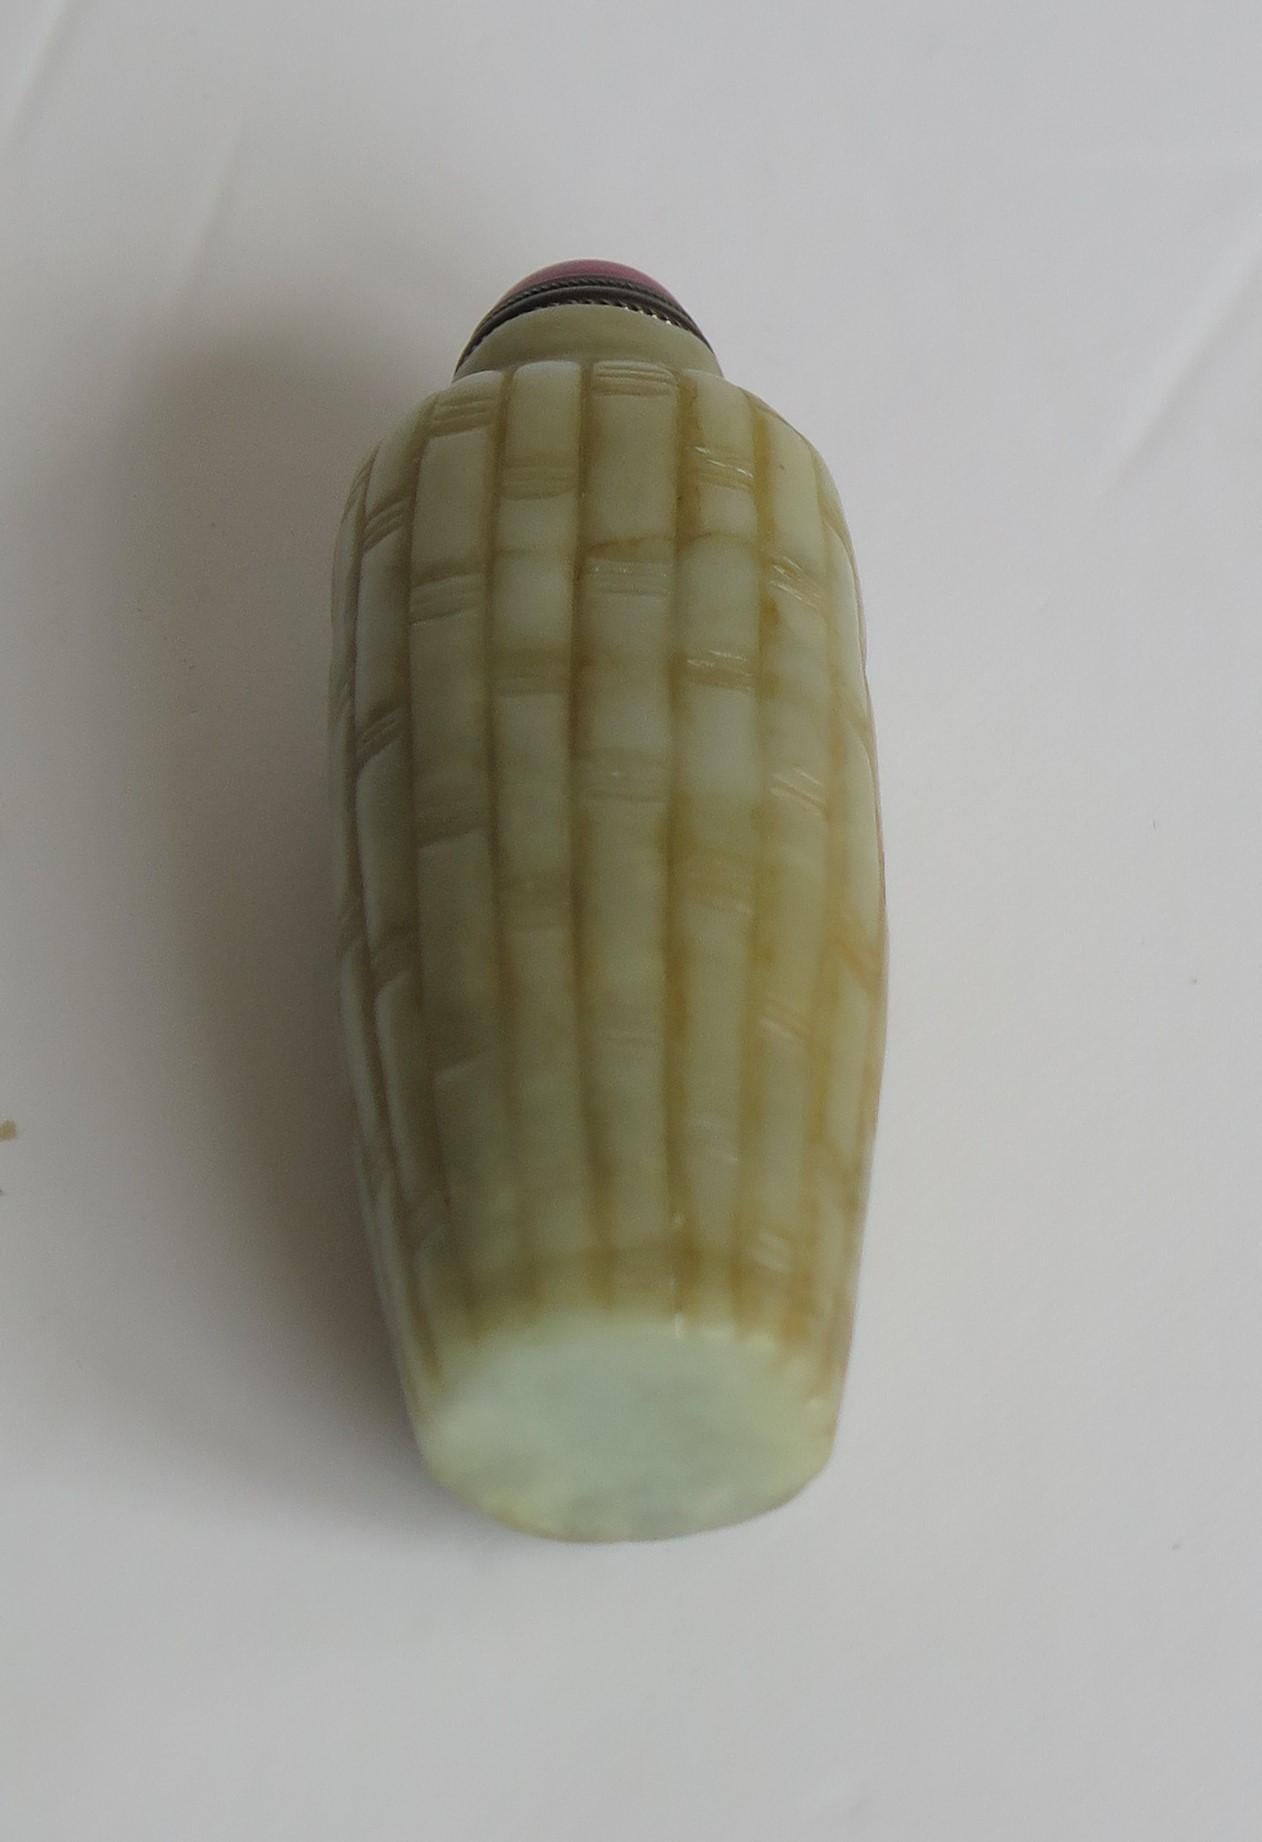 Chinese Snuff Bottle Hand Carved Natural Serpentine Stone Spoon Top, circa 1920 10